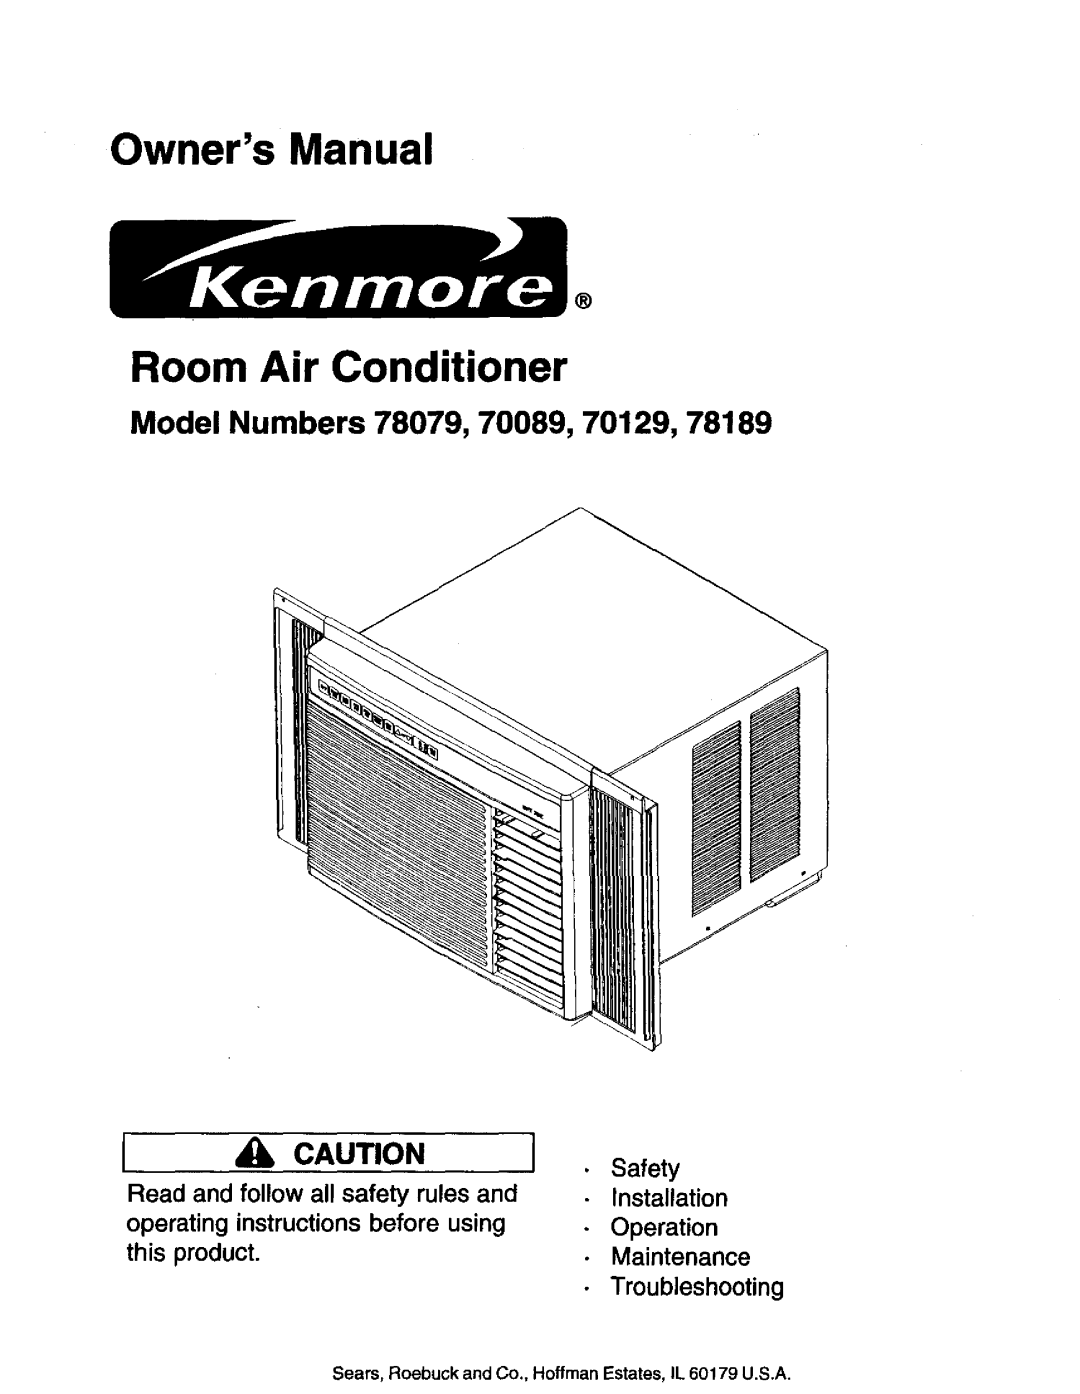 Kenmore owner manual Model Numbers 78079, 70089, 70129, _Il Caution, Operation, Maintenance, instructions before using 